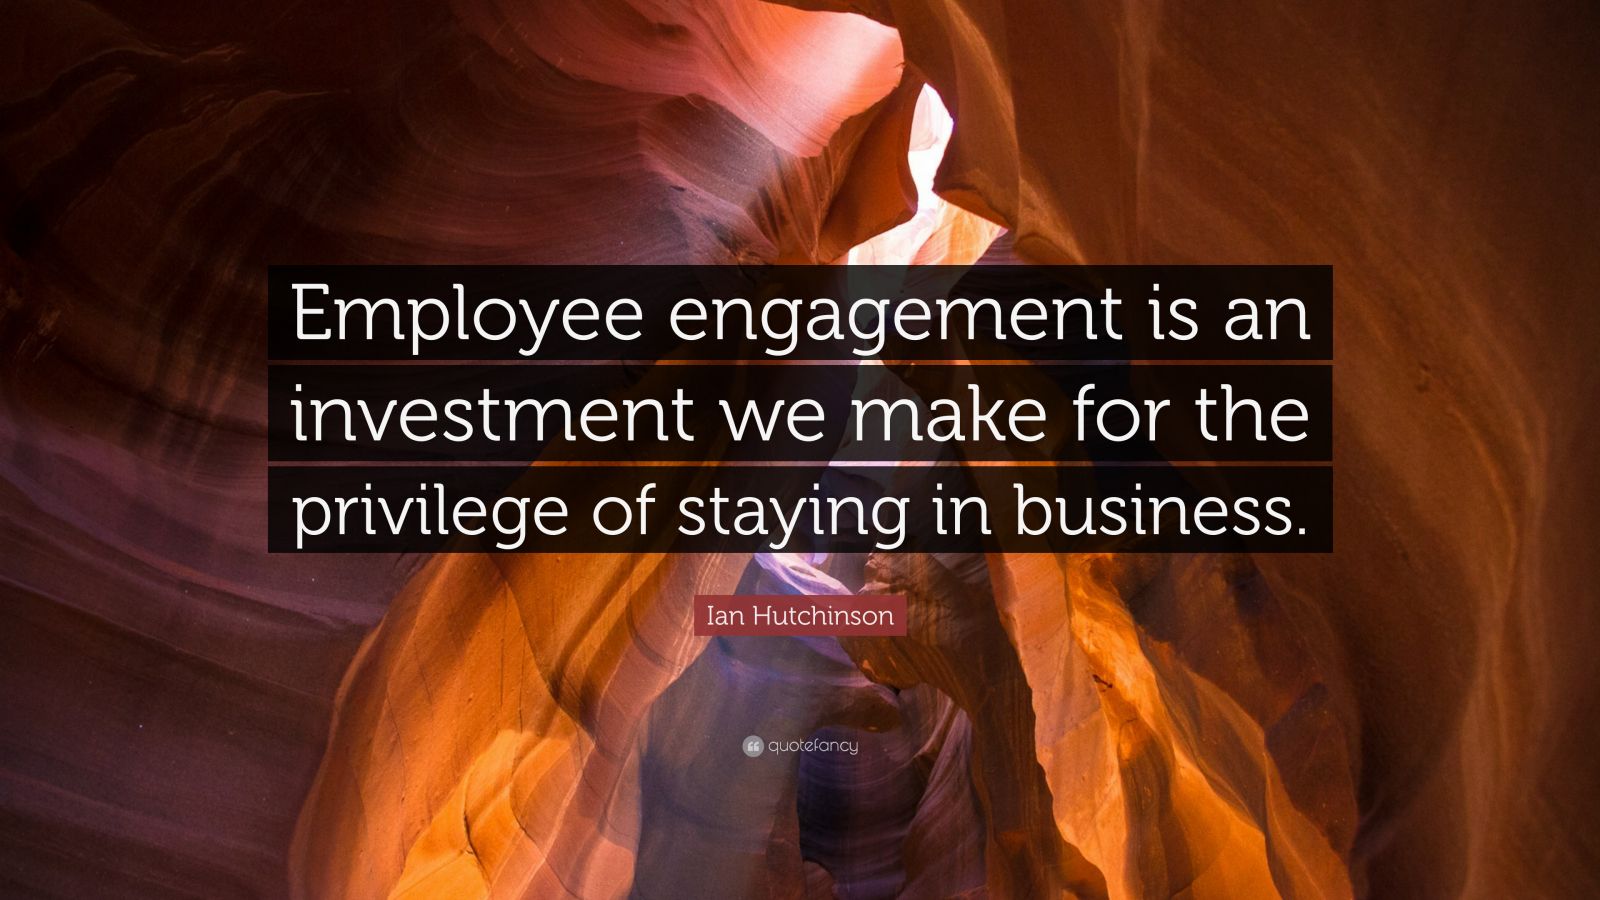 Ian Hutchinson Quote: “Employee engagement is an investment we make for